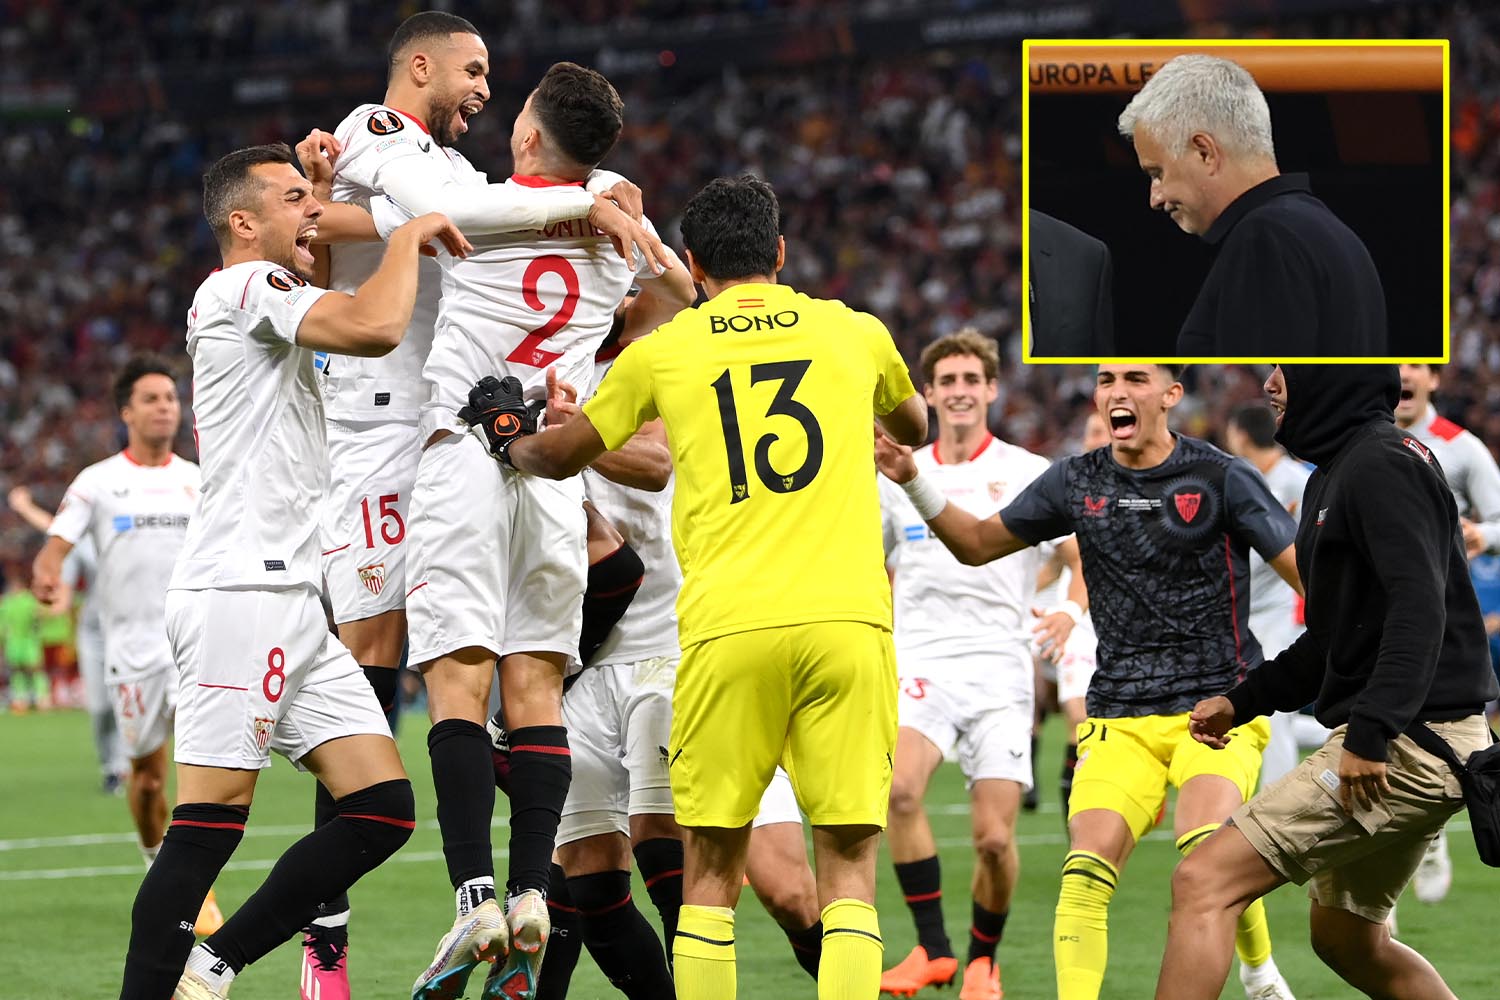 Jose Mourinho gives Europa League runners-up medal to young fan as Sevilla end Roma manager's perfect record